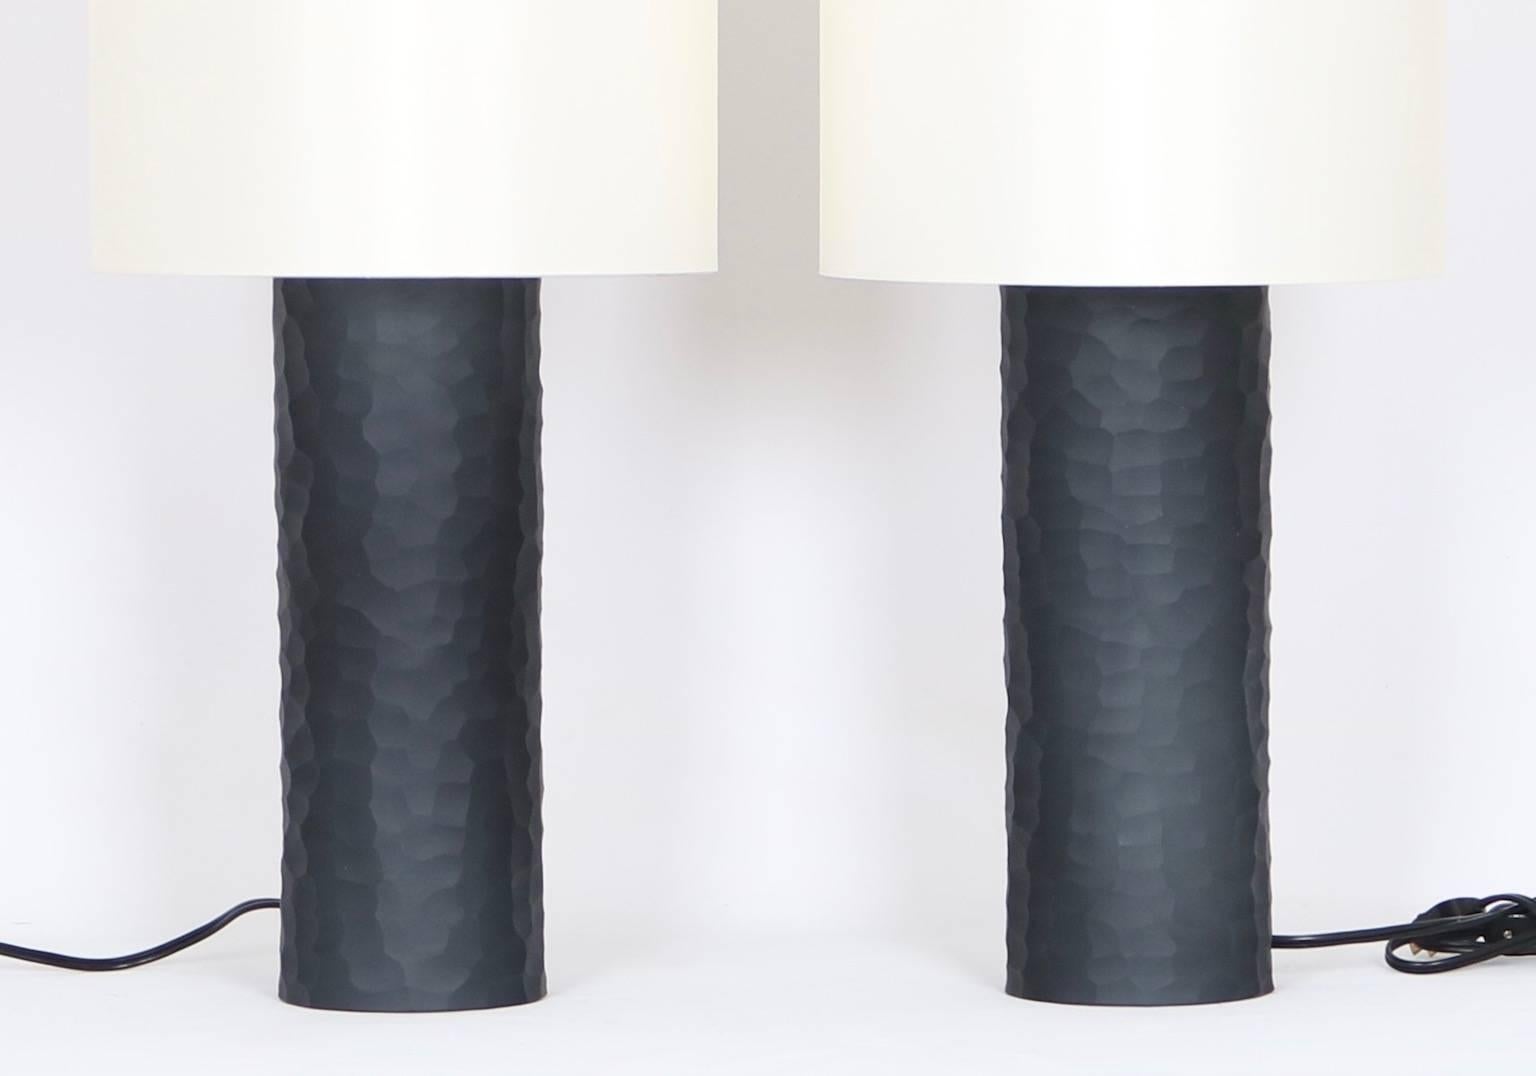 Cylindrical table lamps by Vivarini for Formia in black battuto Murano glass, signed and dated to the top of the lamps. These lamps have never been used and come with silk paper shades.

The listed height is to the top of the shade; the height of